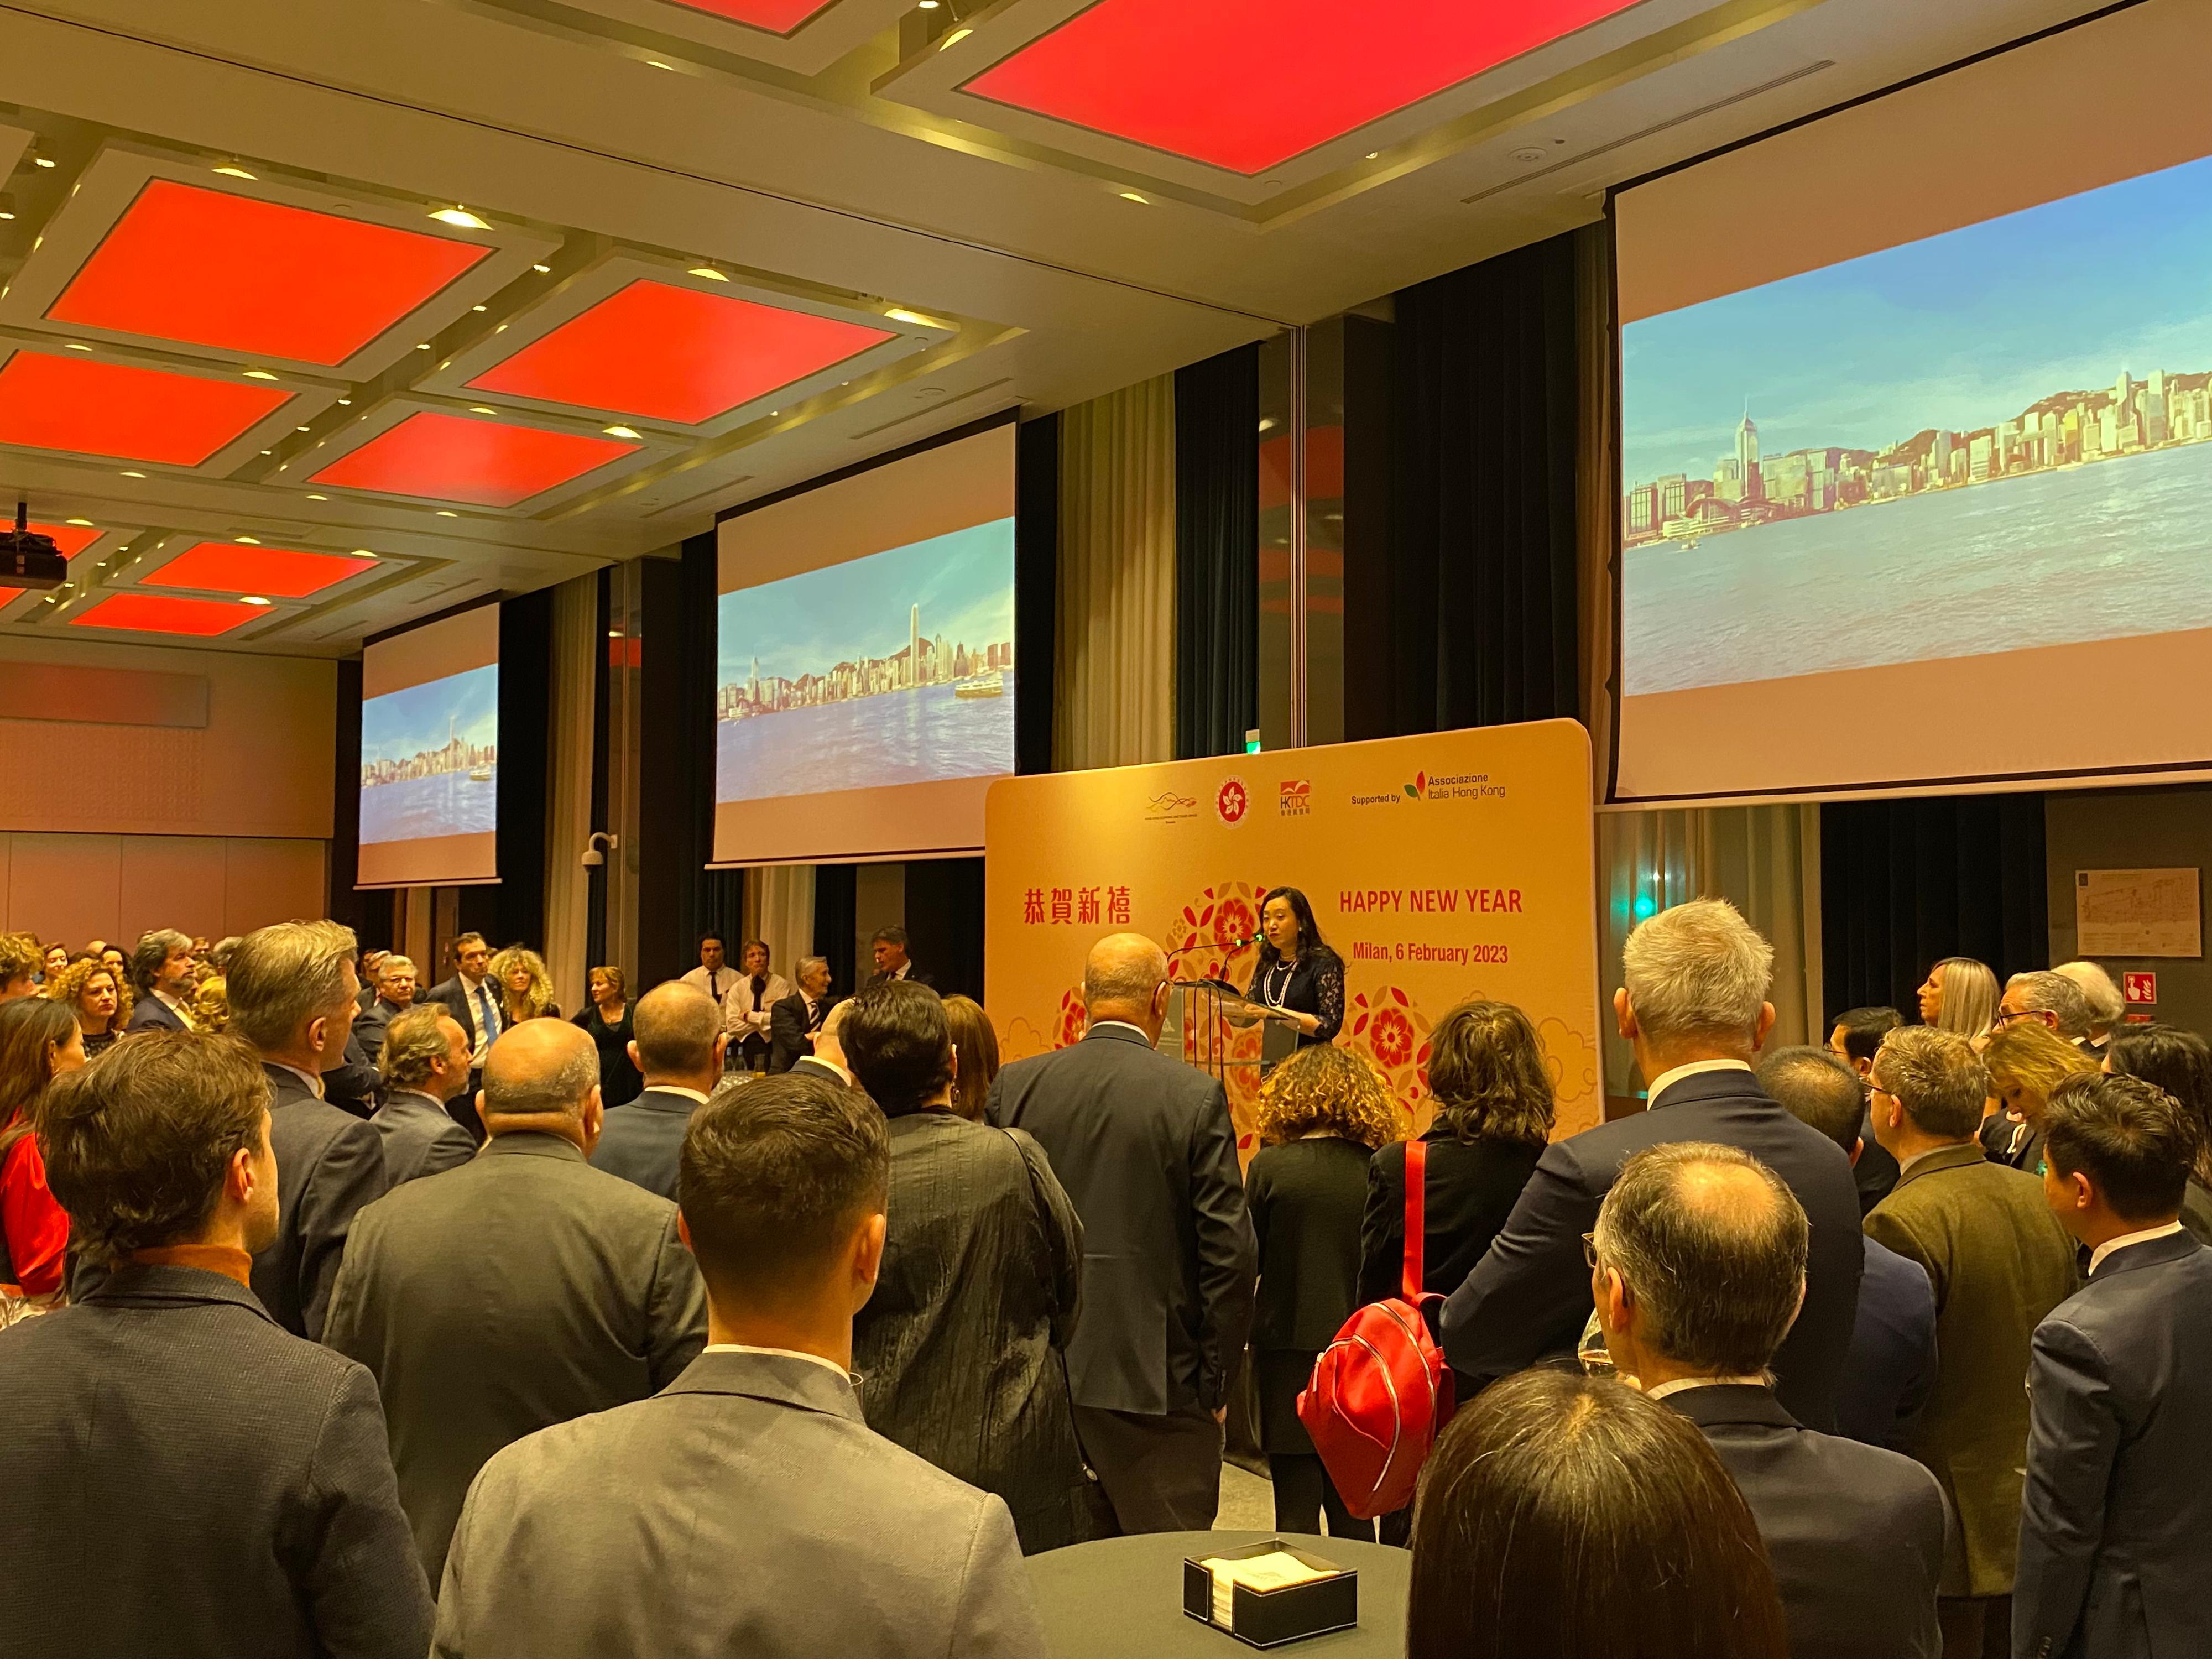 The Acting Special Representative for Hong Kong Economic and Trade Affairs to the European Union, Miss Grace Li, addressed guests at the Chinese New Year reception in Milan on February 6 (Milan time).